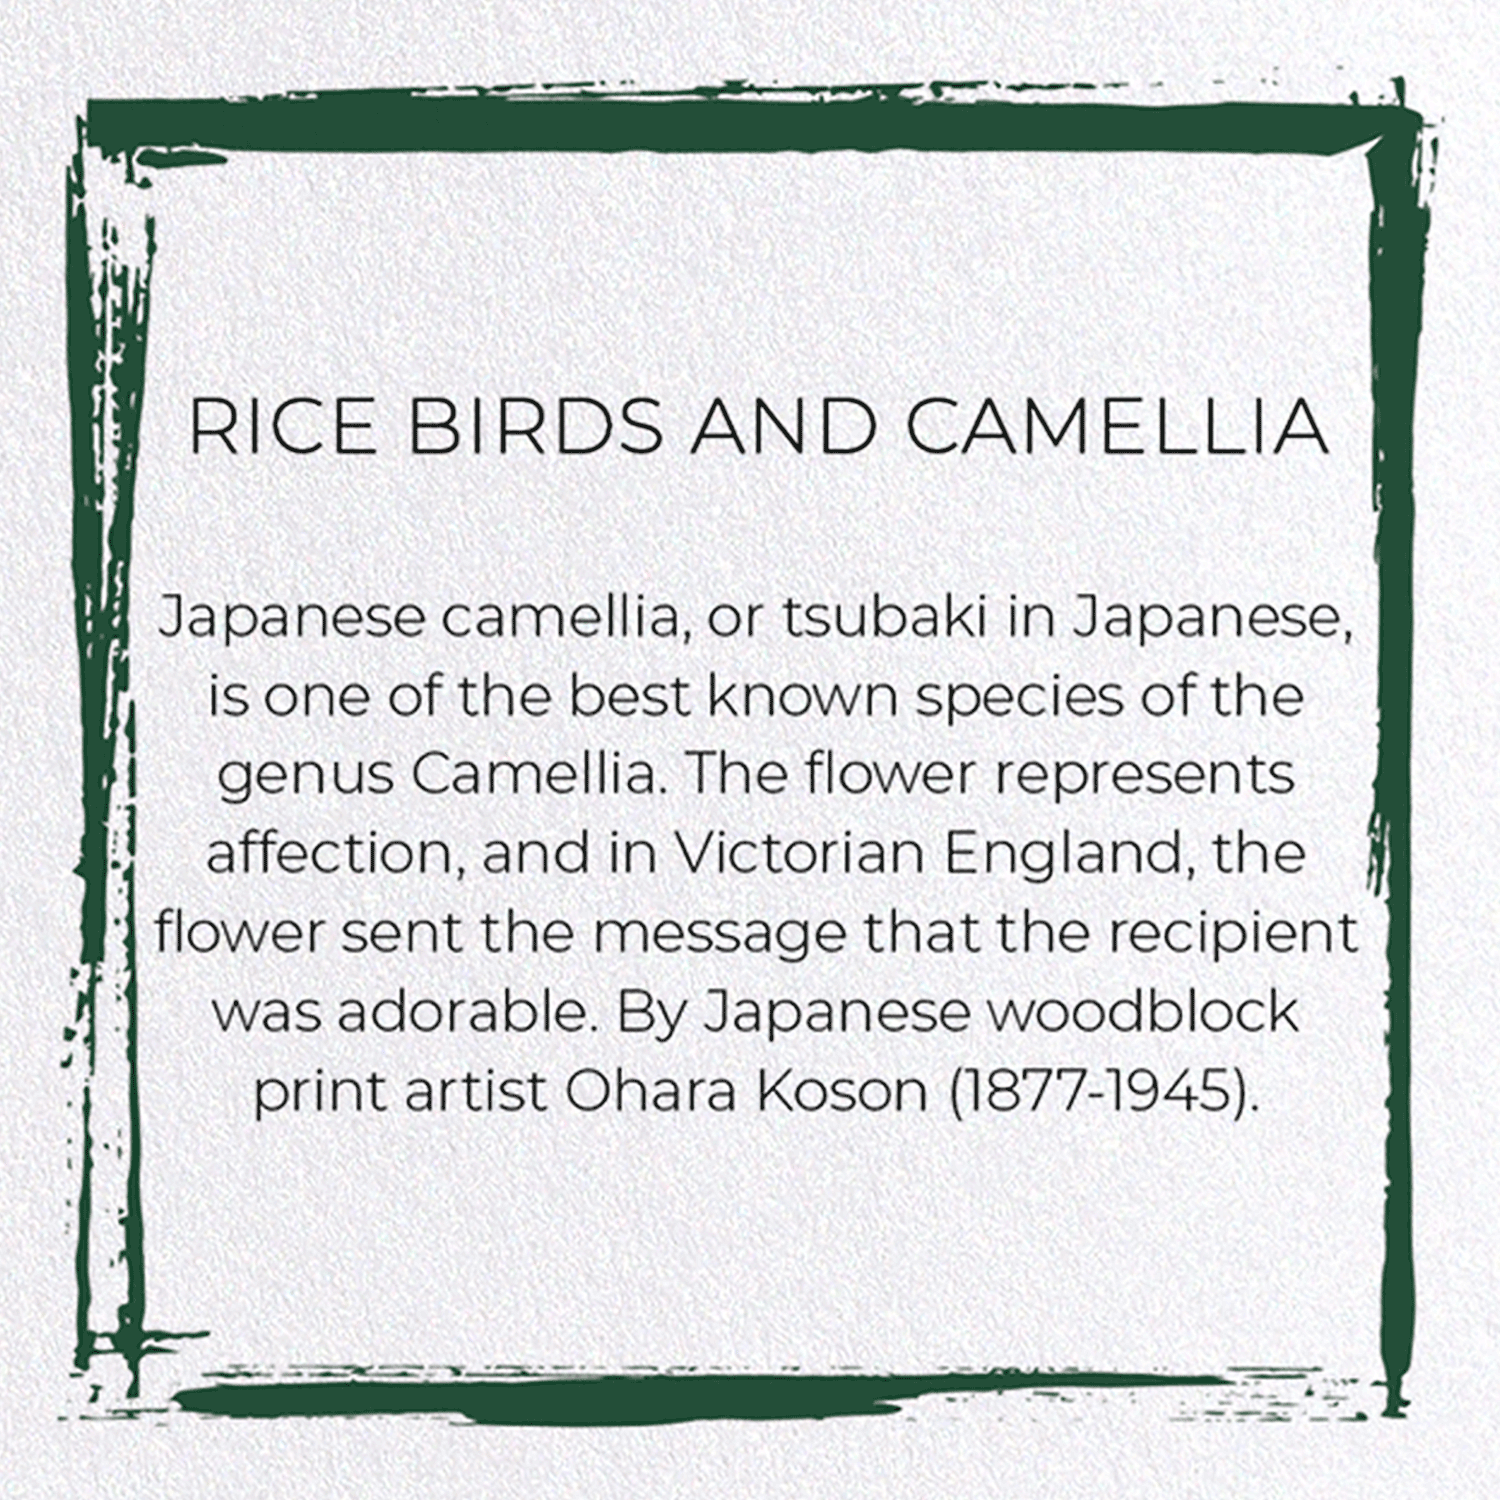 RICE BIRDS AND CAMELLIA: Japanese Greeting Card